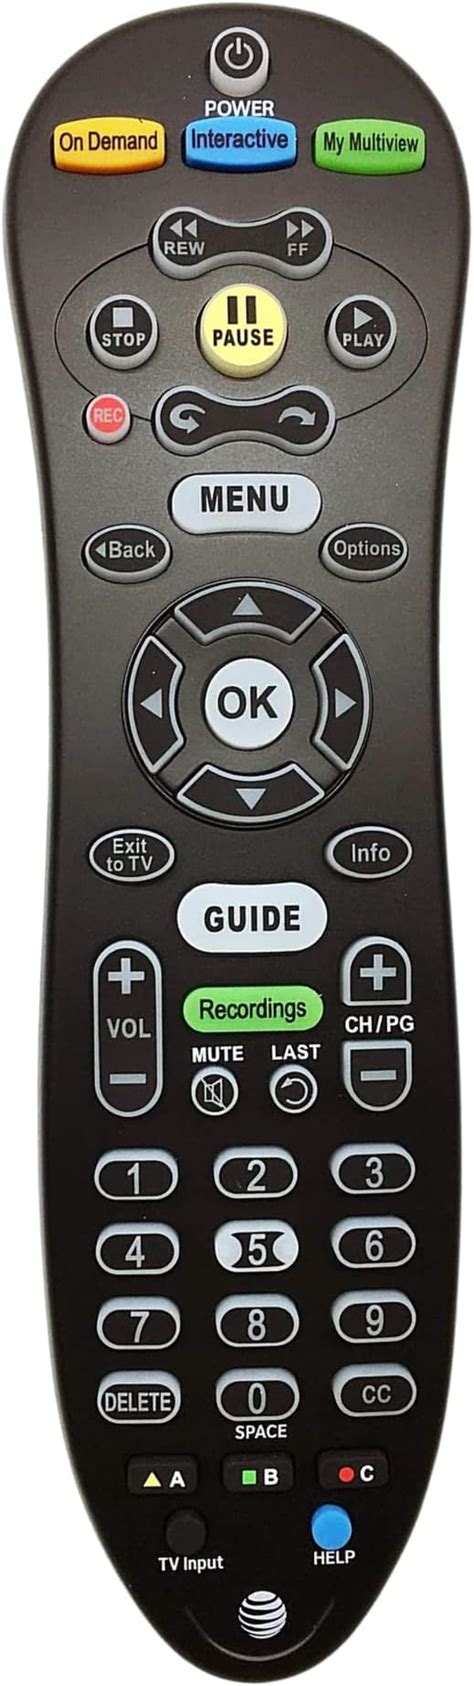 Turn on the device you wish to control (TV, VCR, DVD, DVR, satellite receiver, or cable box). Locate the Brand Code (s) from the list provided with your remote. Press and hold the Device button you wish to program. (TV, DVD, Aux, etc.) When the LED for that button turns on and remains on, keep holding down that button.. 